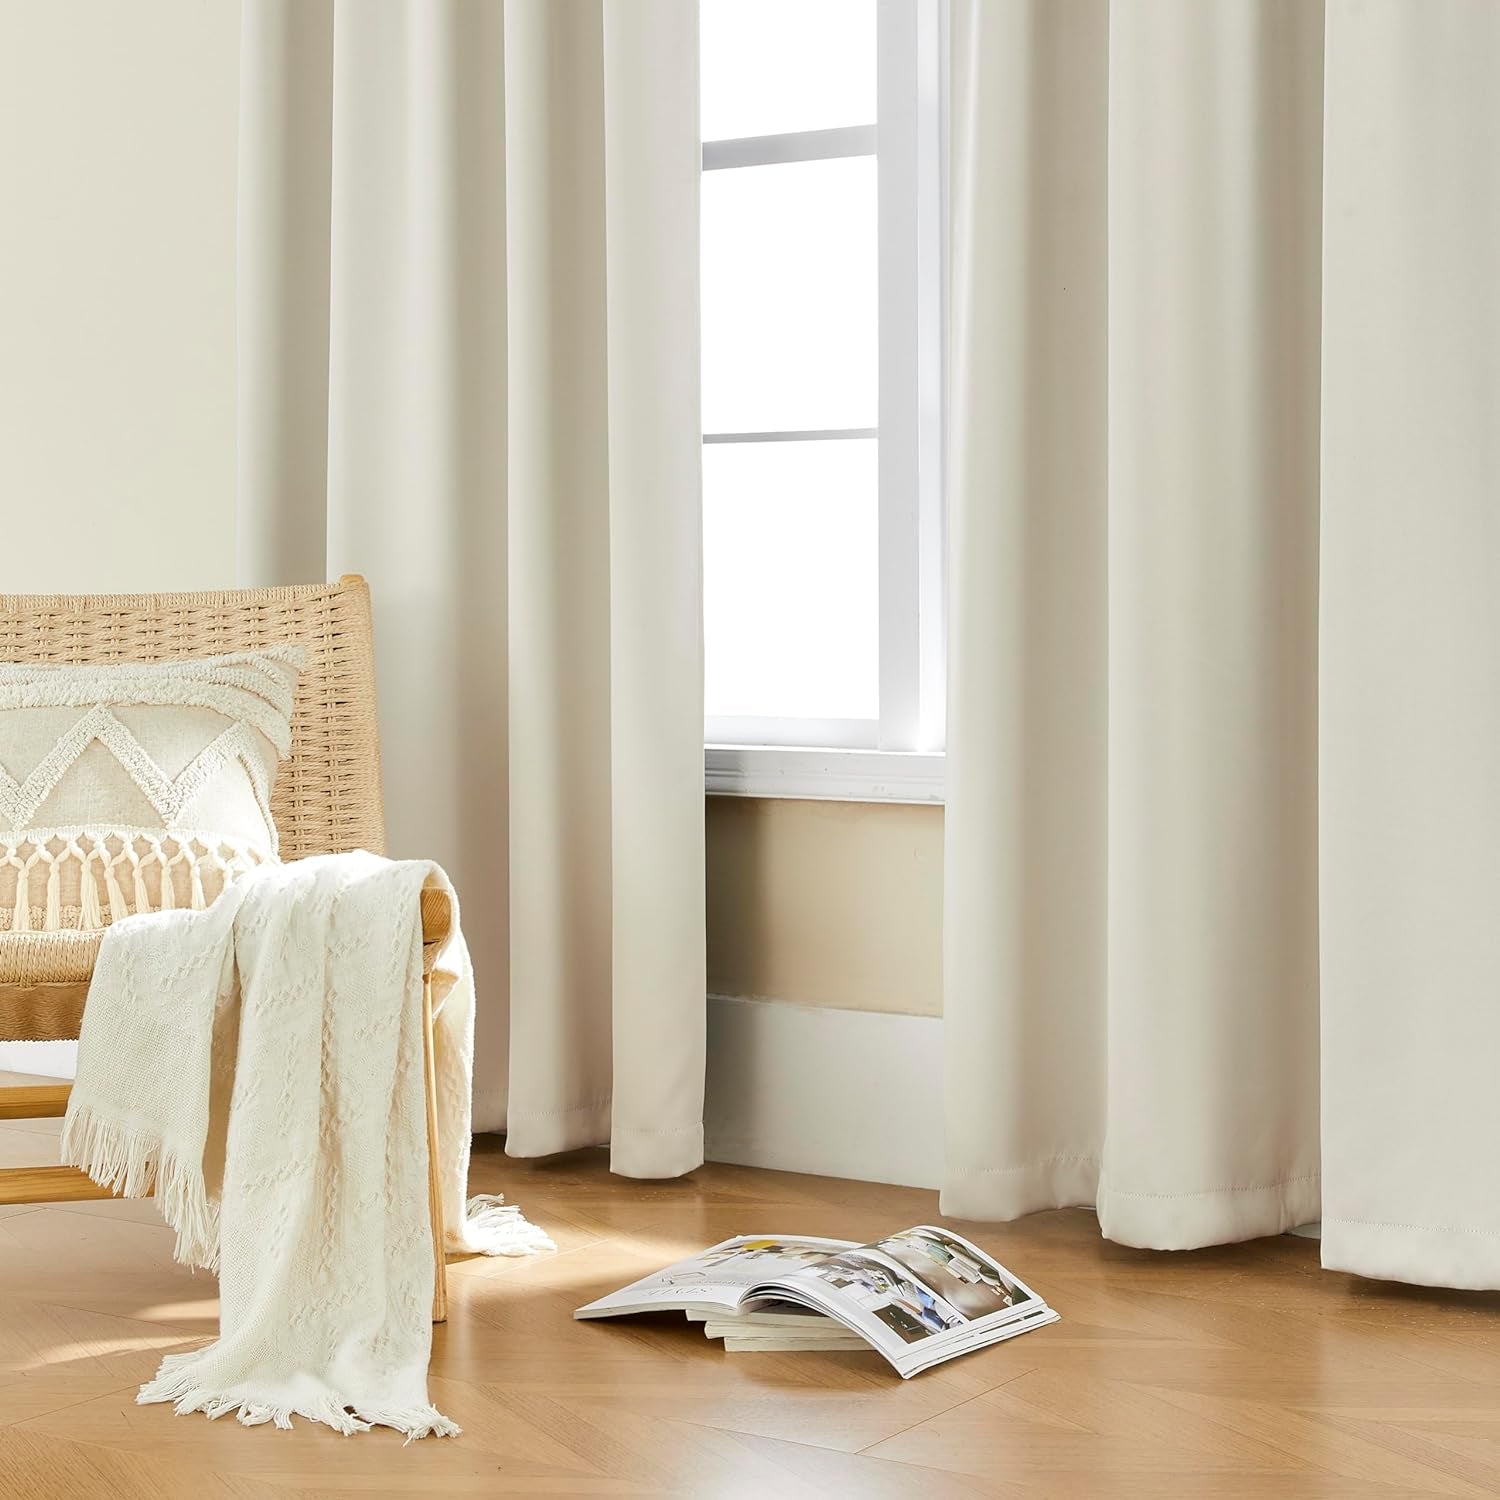 SHINELAND Beige Room Darkening Curtains 105 Inches Long for Living Room Bedroom,Cortinas Para Cuarto Bloqueador De Luz,Thermal Insulated Back Tab Pleat Blackout Curtains for Sunroom Patio Door Indoor  SHINELAND   